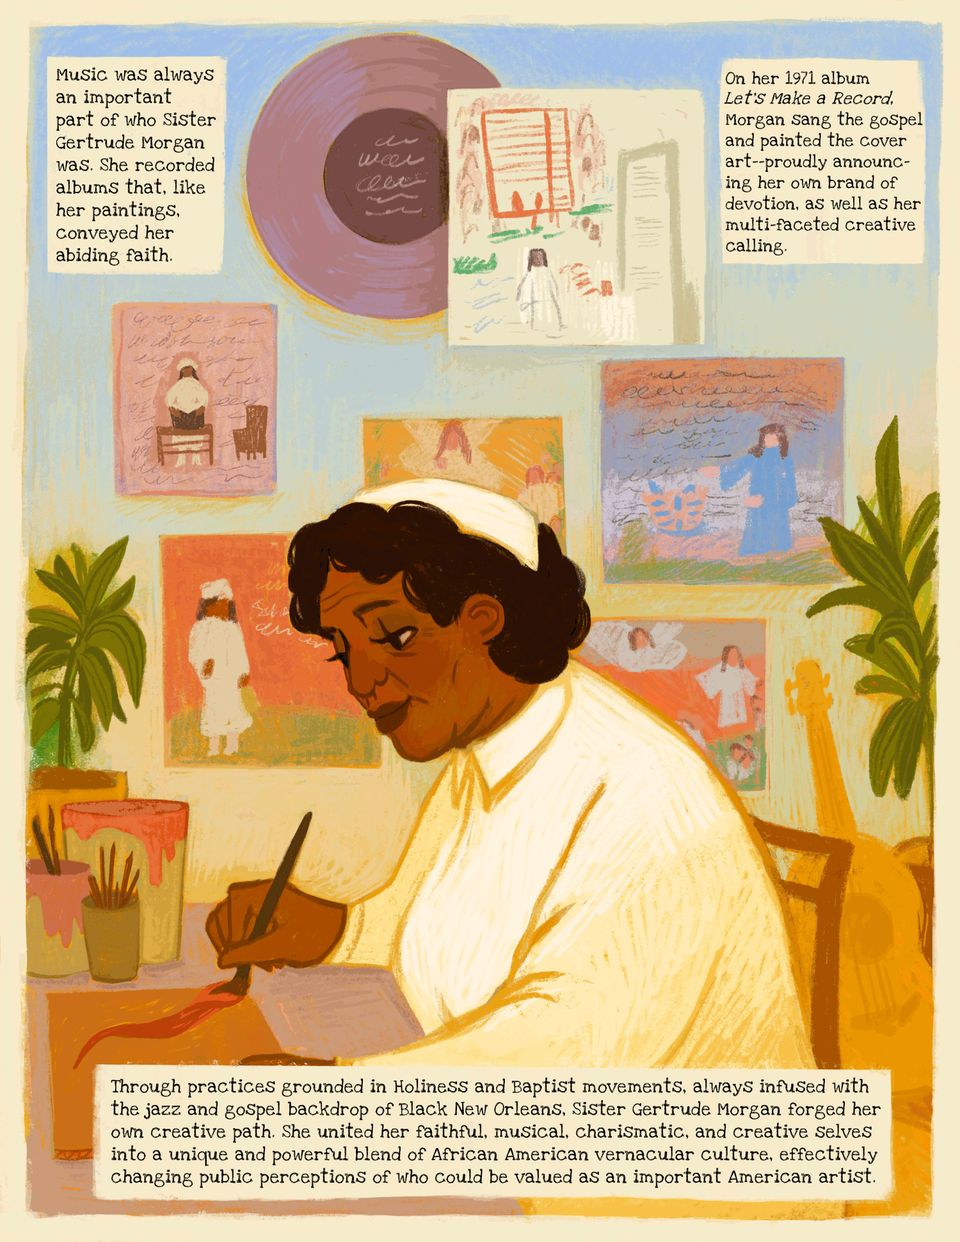 Illustration and description of Sister Gertrude sitting at a desk creating art, with her albums hung on the wall behind her.